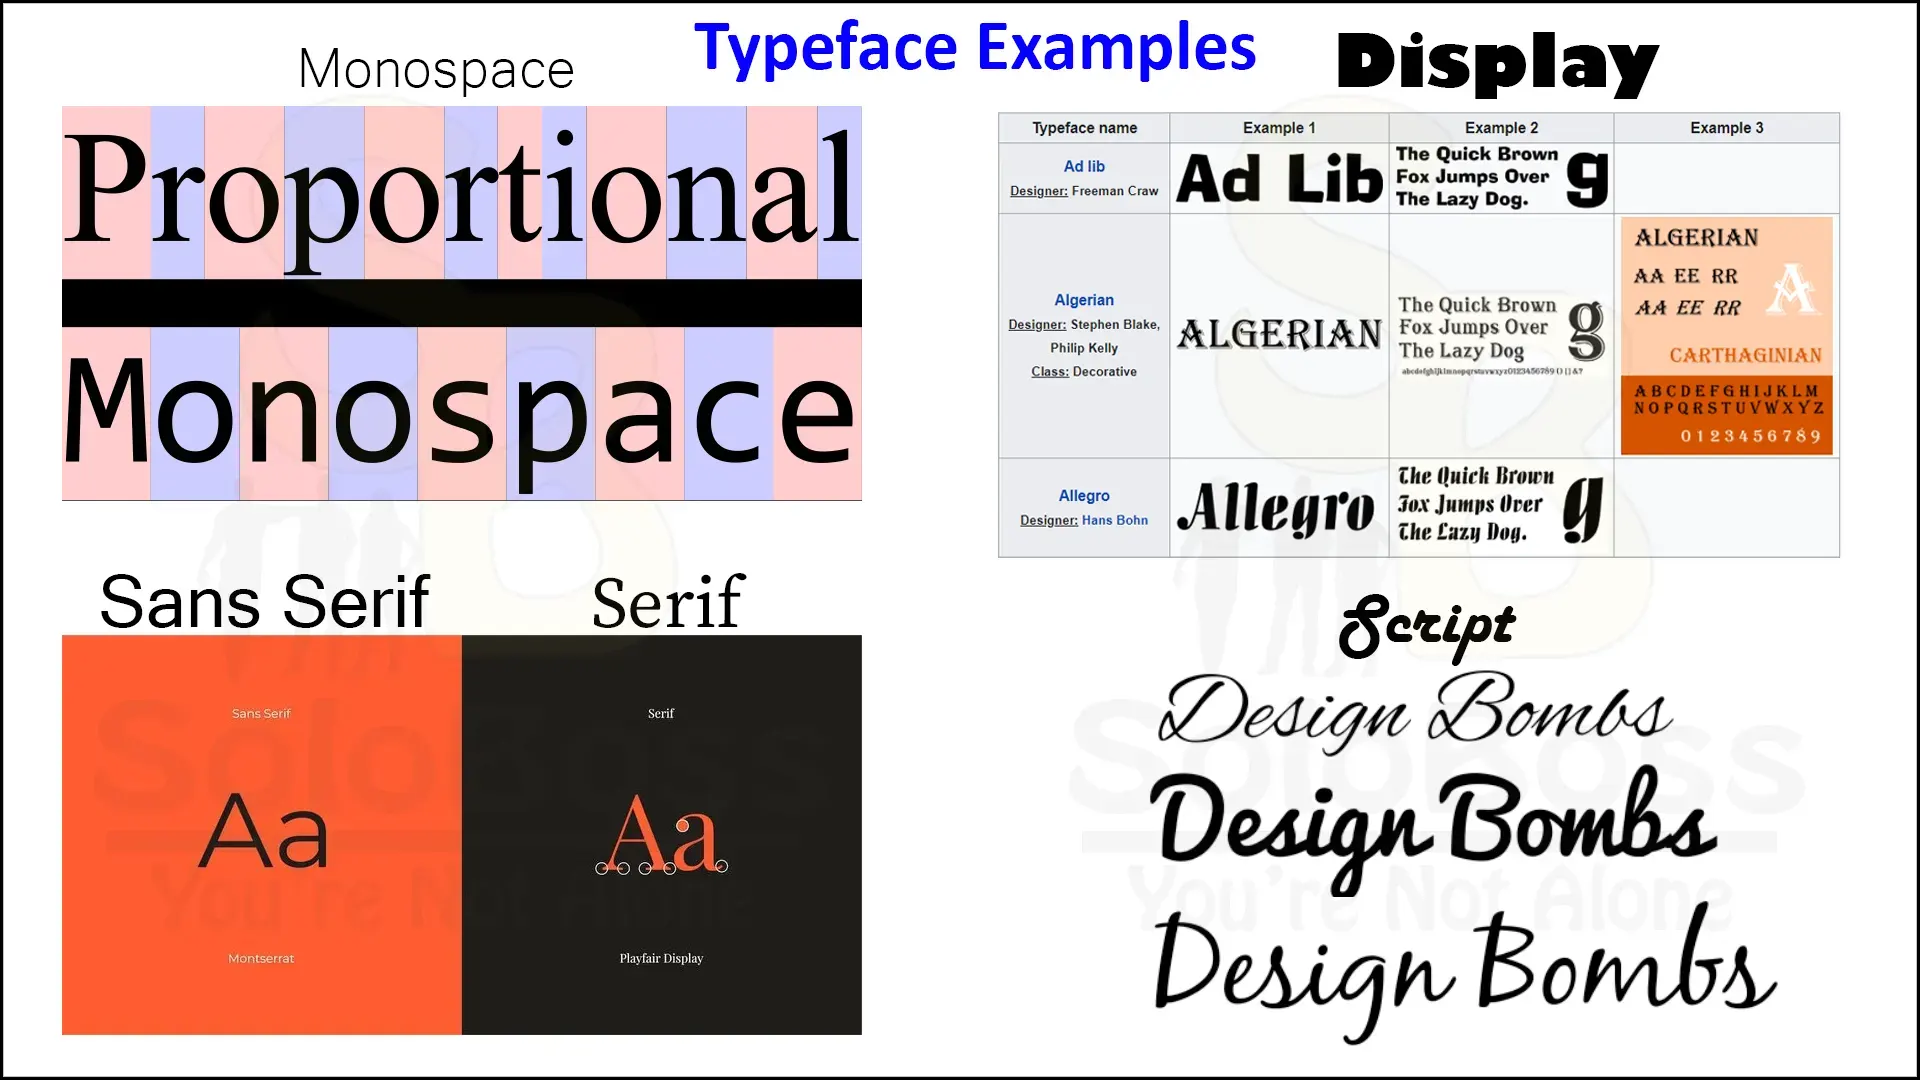 Shows the different typeface examples for fonts.  Demonstrates type face examples when choosing fonts.